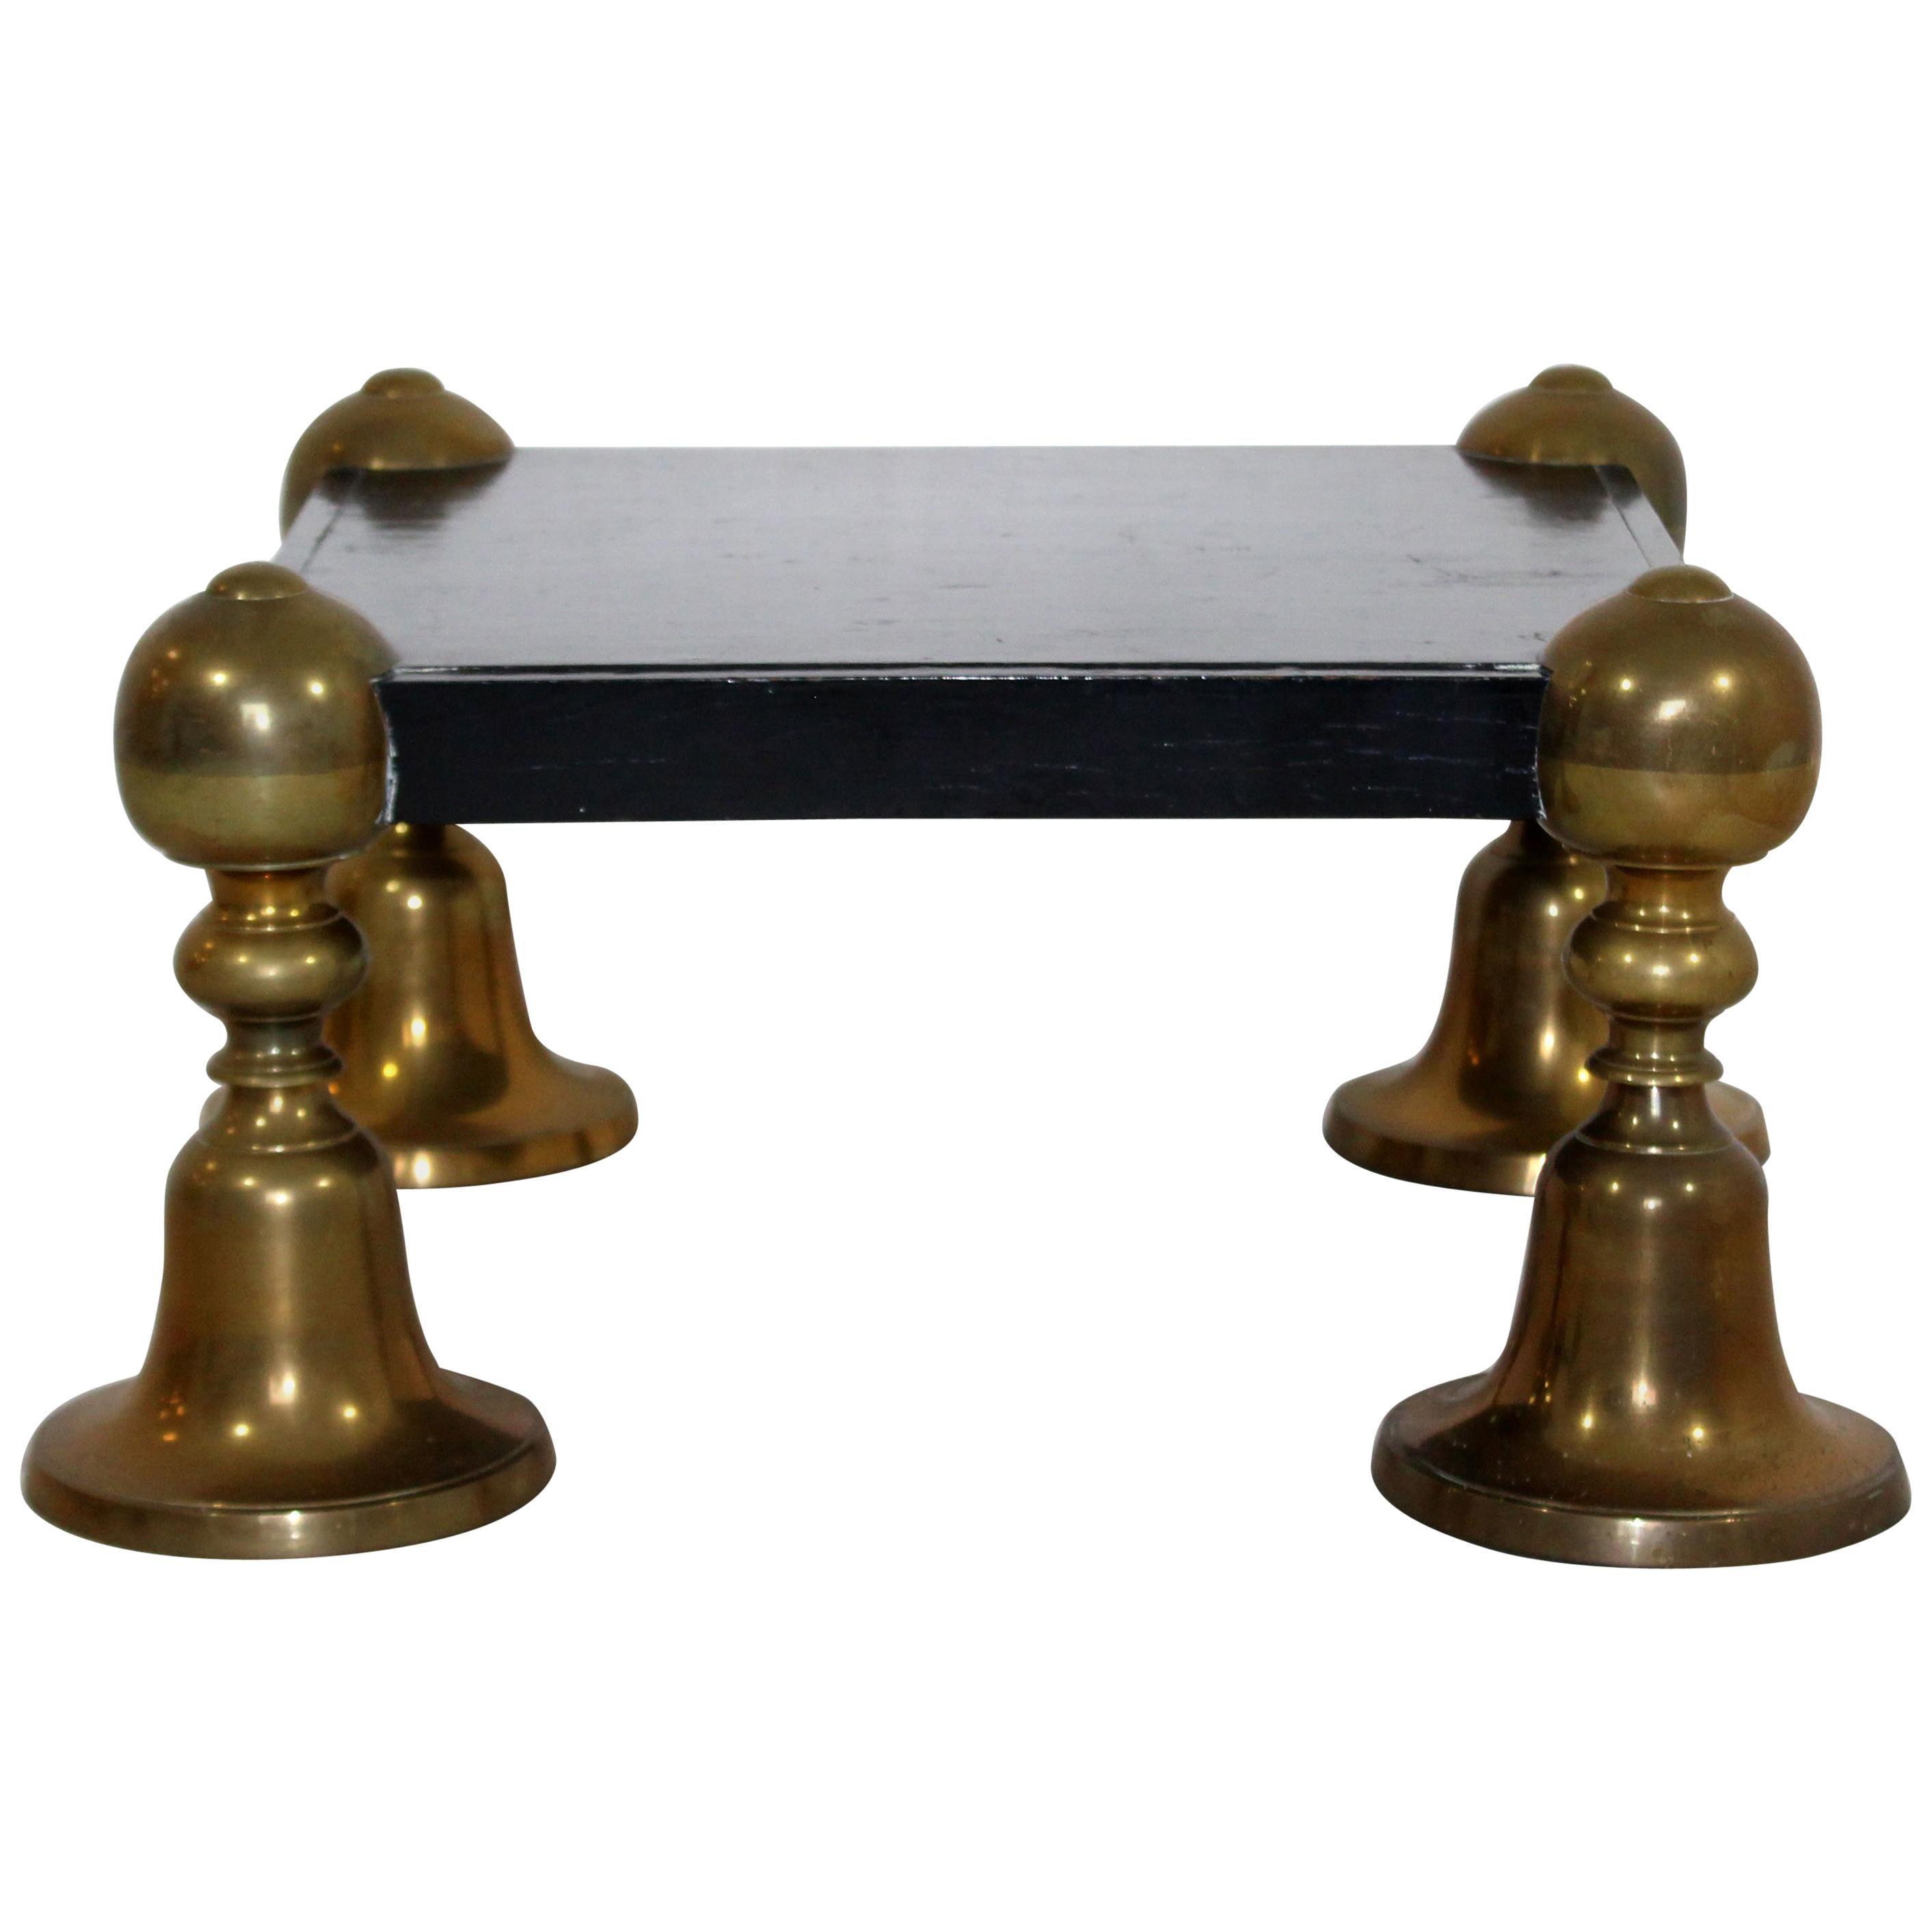 Mid-Century Modern Brass Black Lacquer Wood Pedestal Table Parzinger Style 1960s